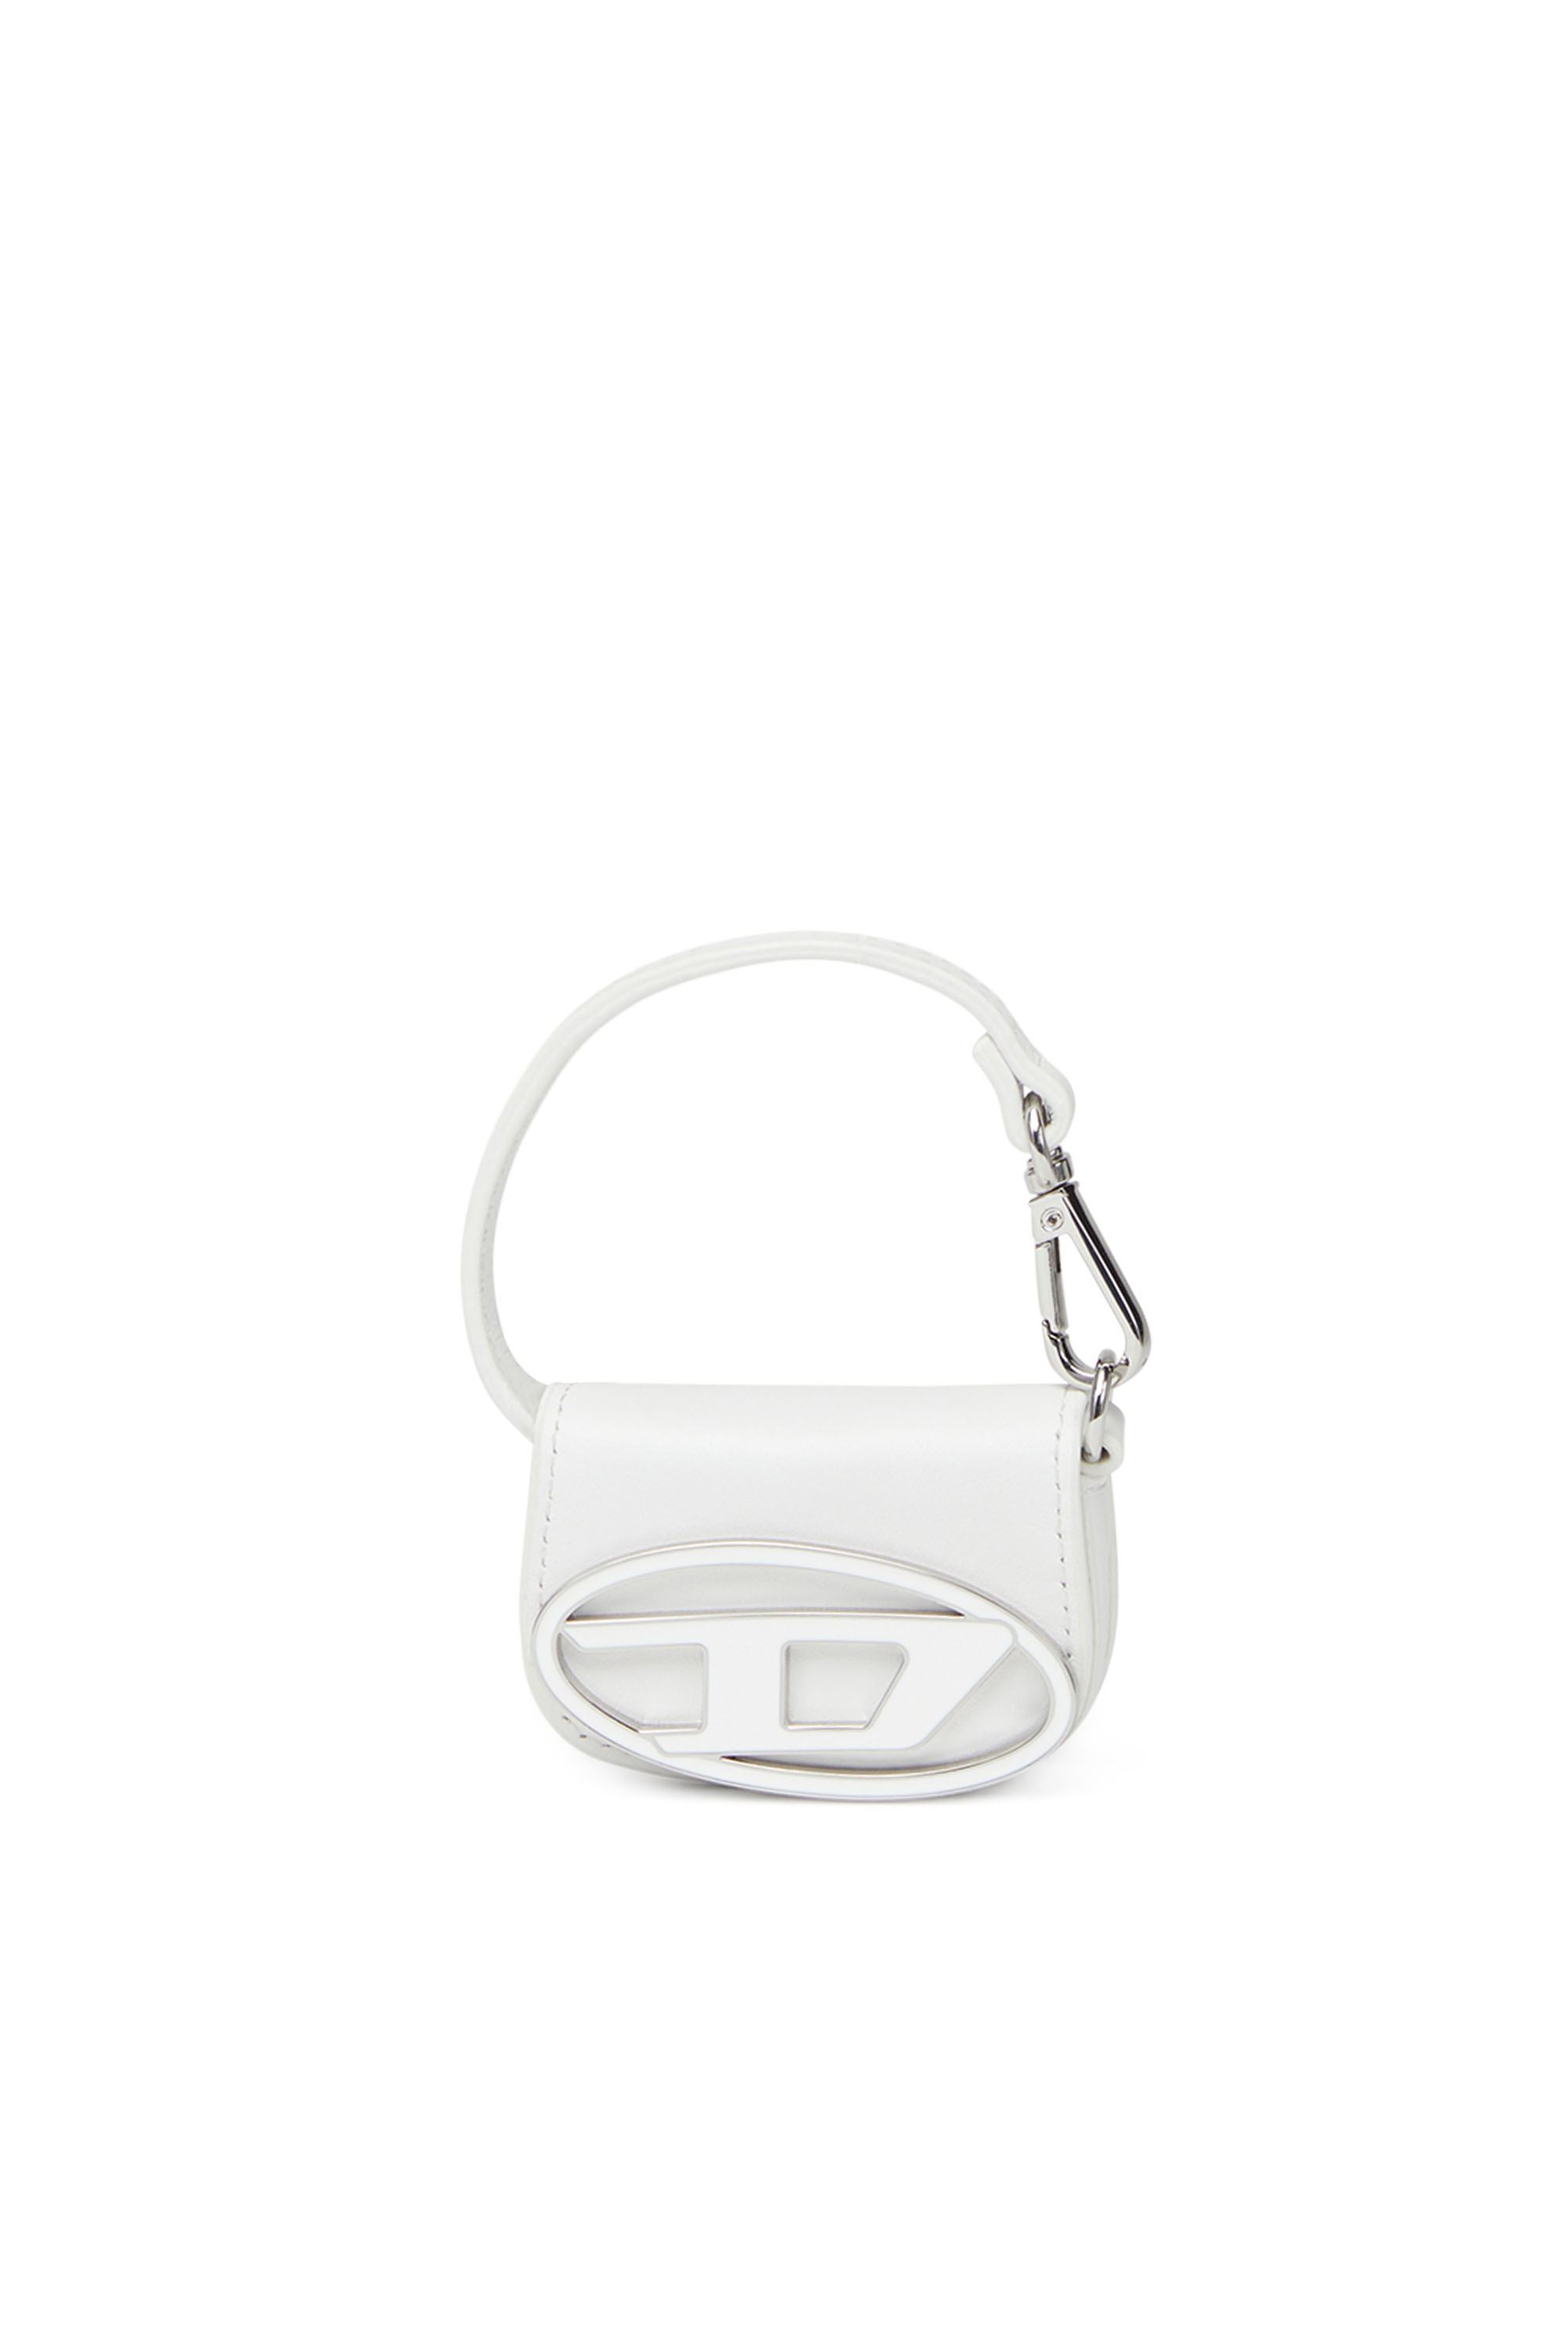 Diesel - Leather bag charm - Bijoux and Gadgets - Woman - White